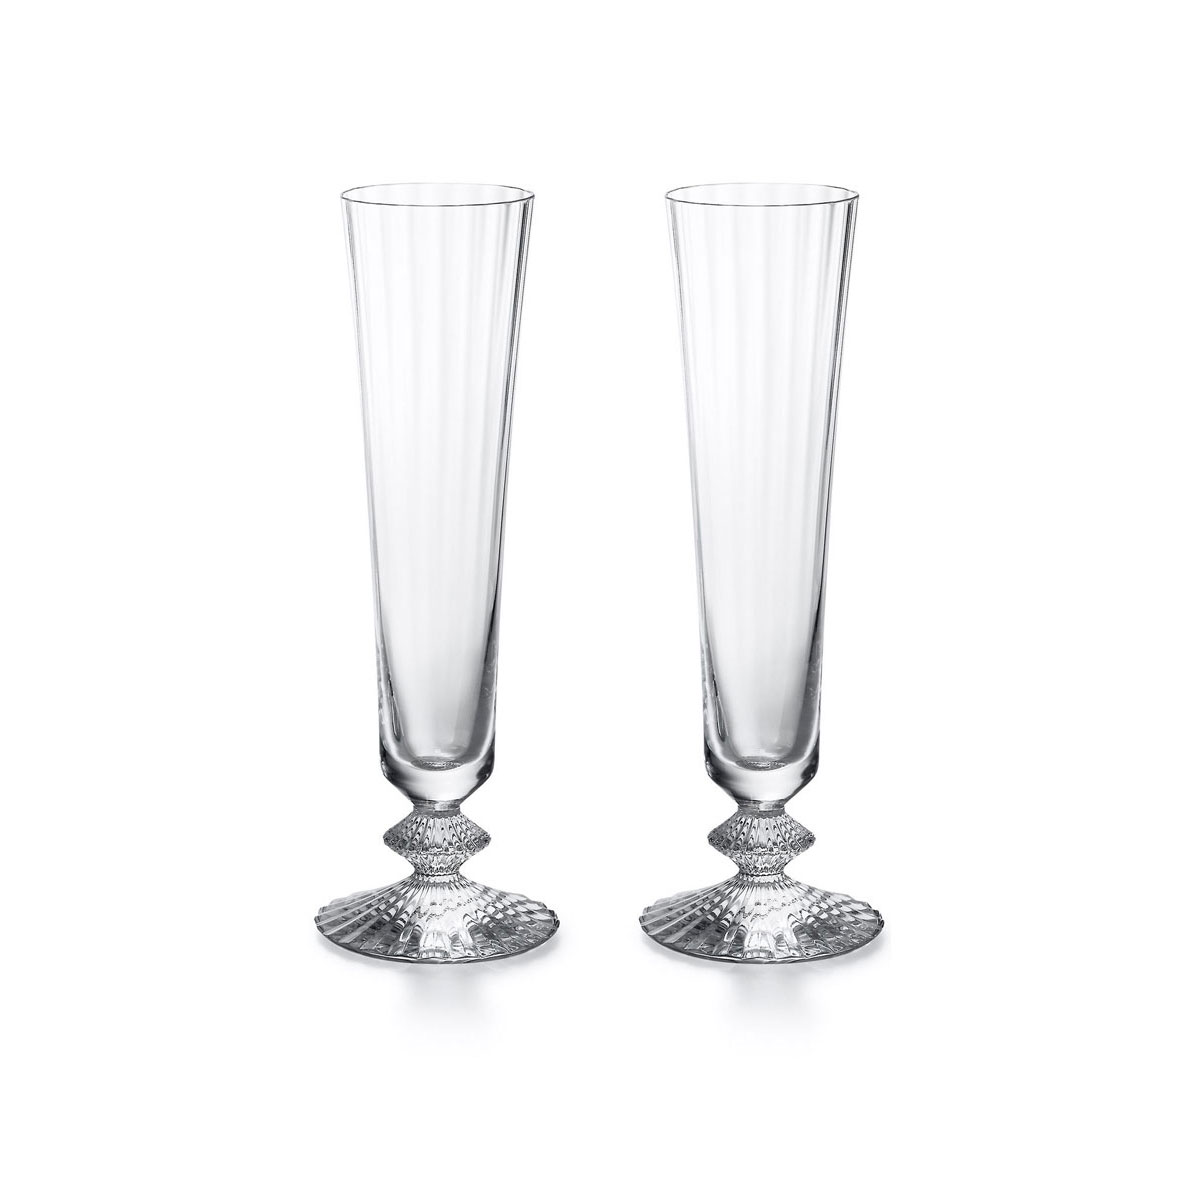 Baccarat Mille Nuits Champagne Flutes, Pair